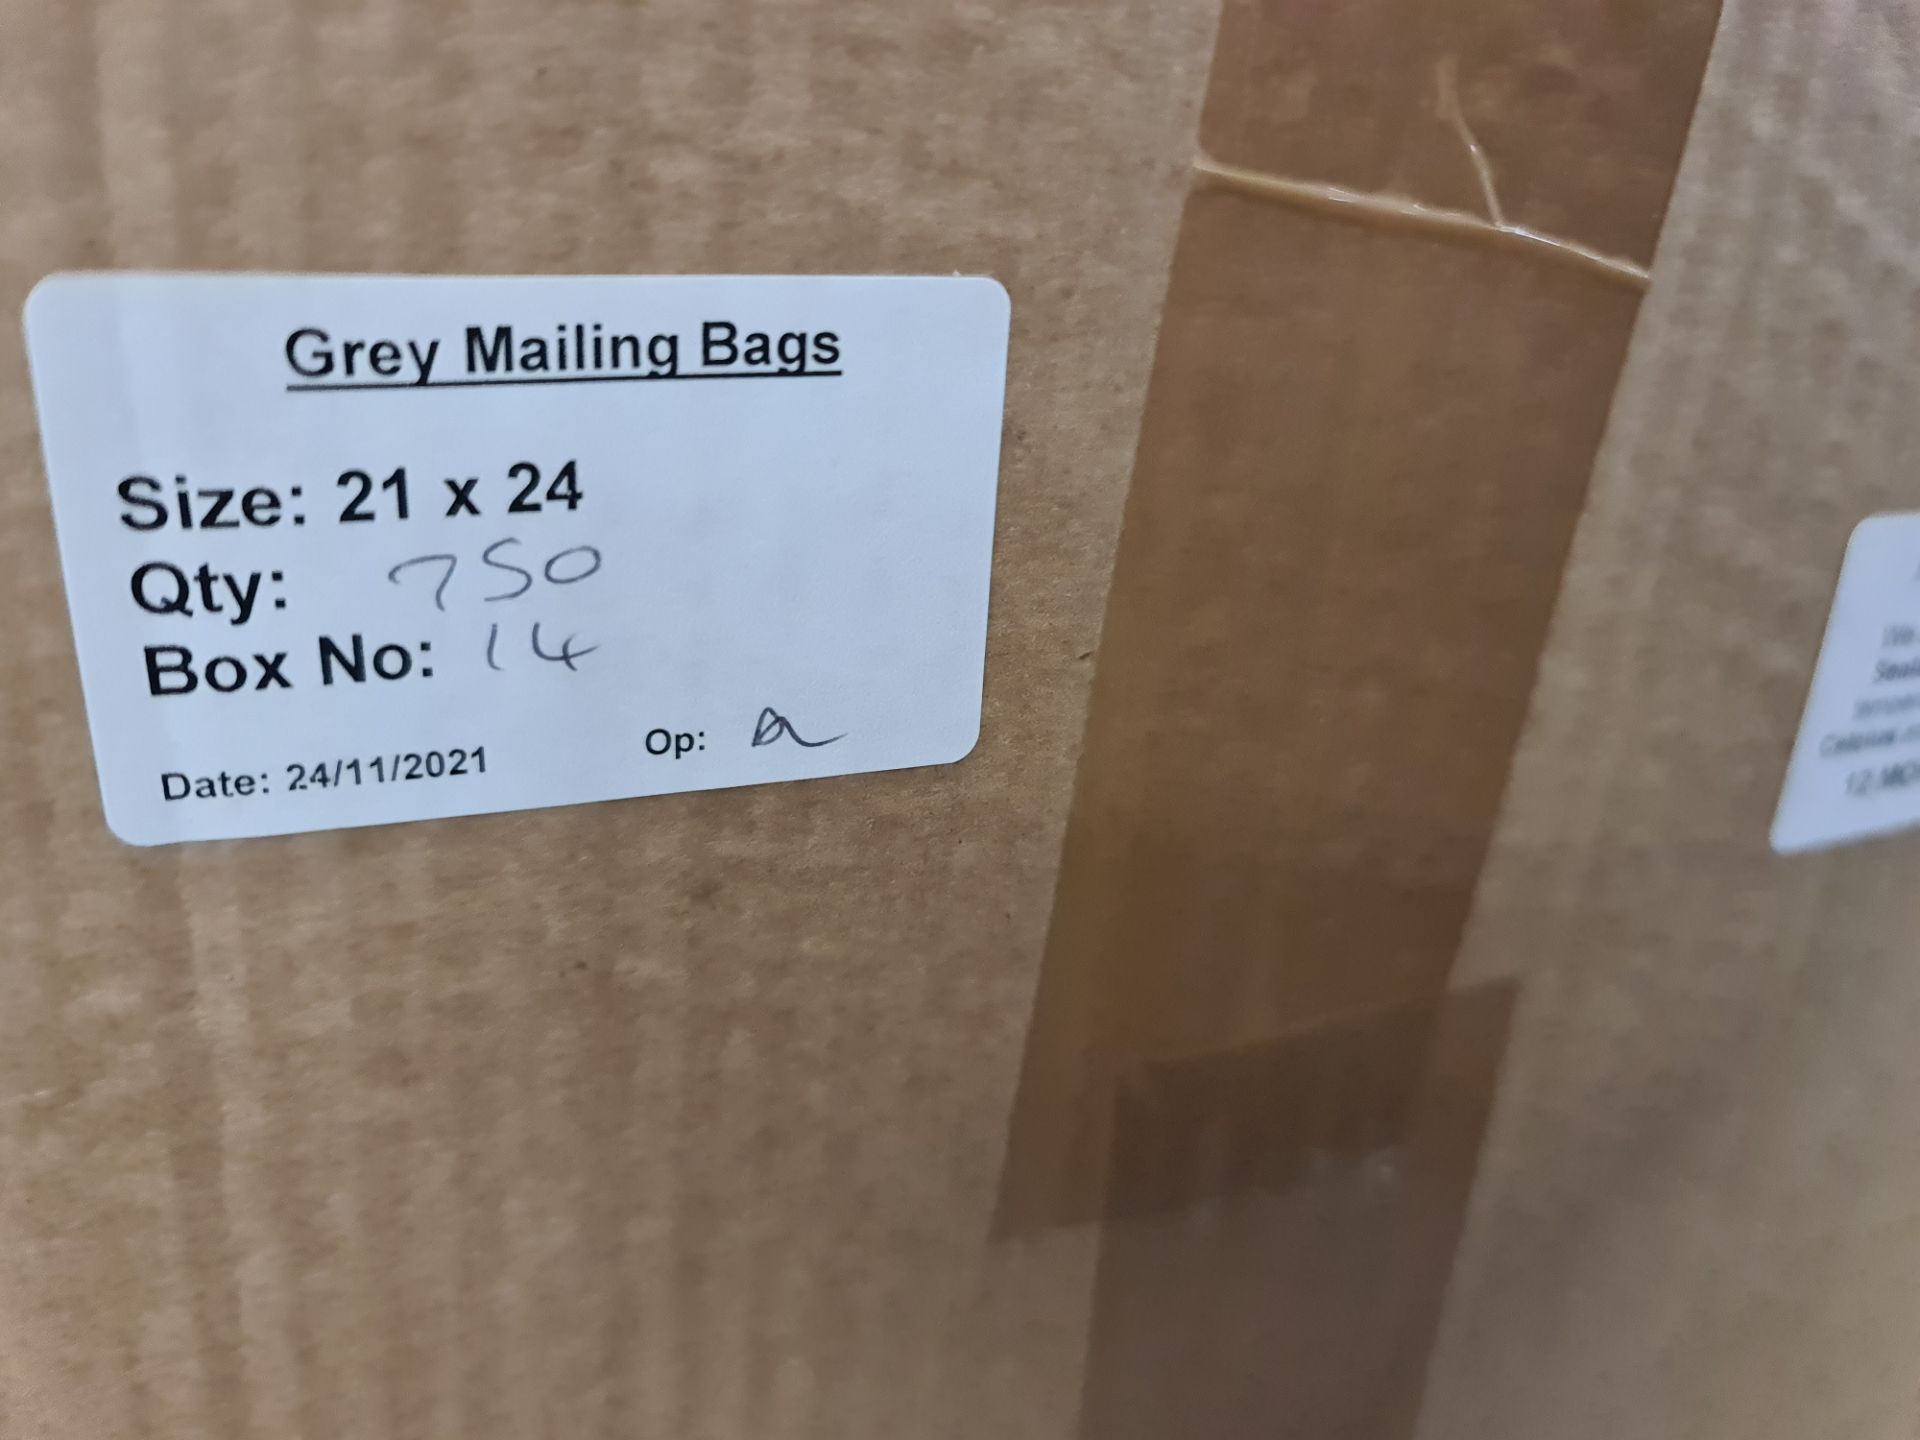 4 boxes, each containing 750 off 21 x 24 grey mailing bags - Image 2 of 3